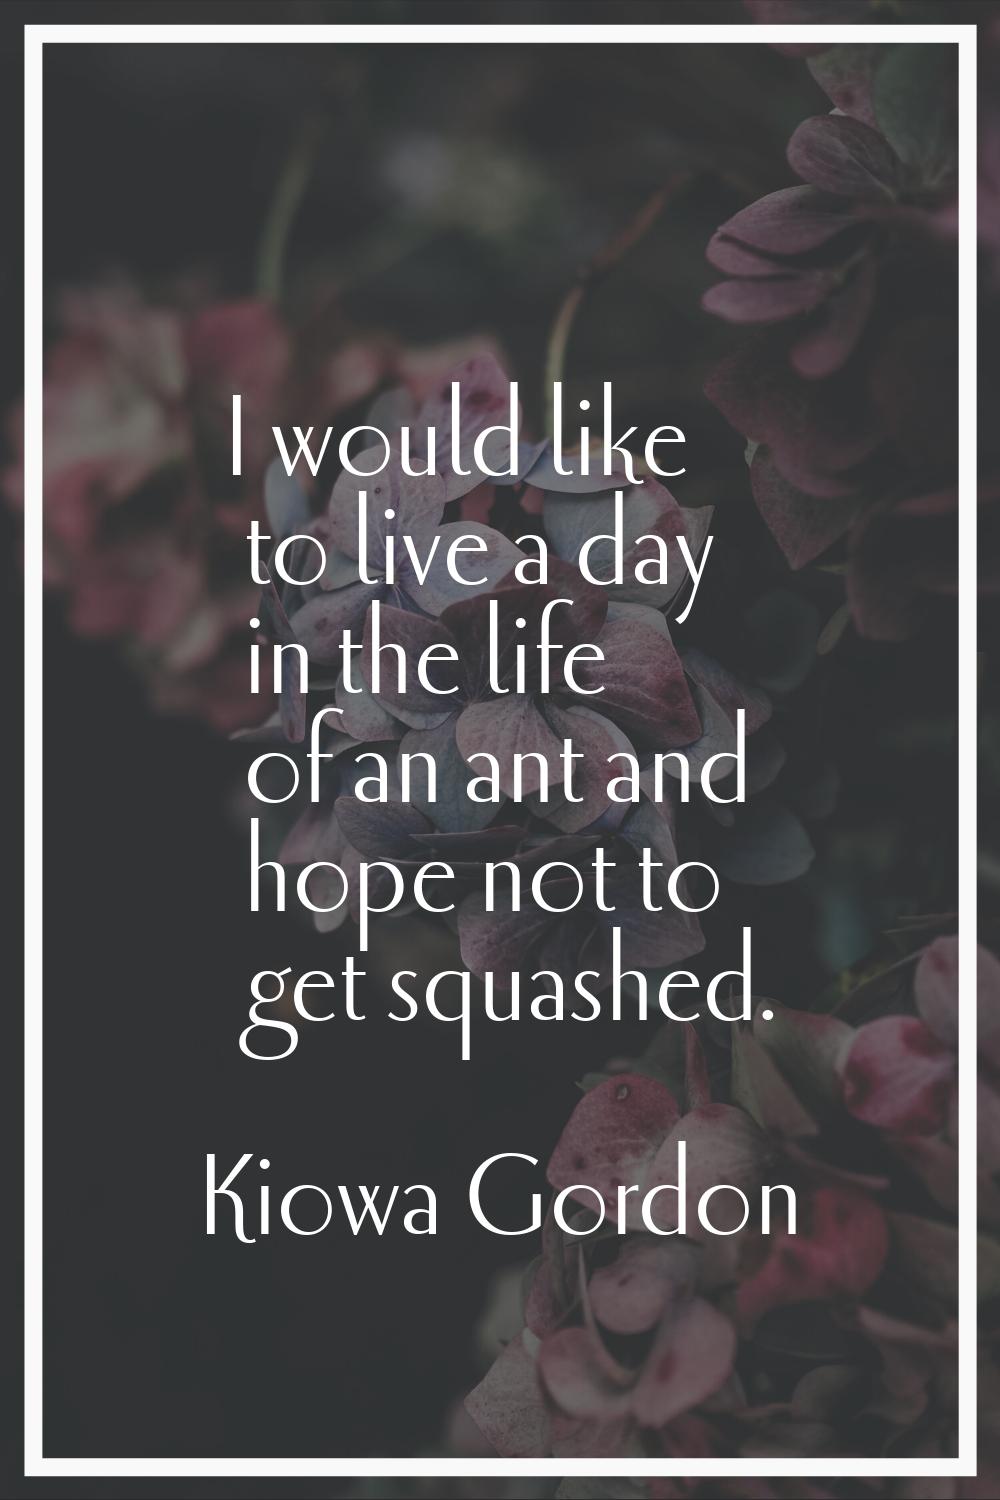 I would like to live a day in the life of an ant and hope not to get squashed.